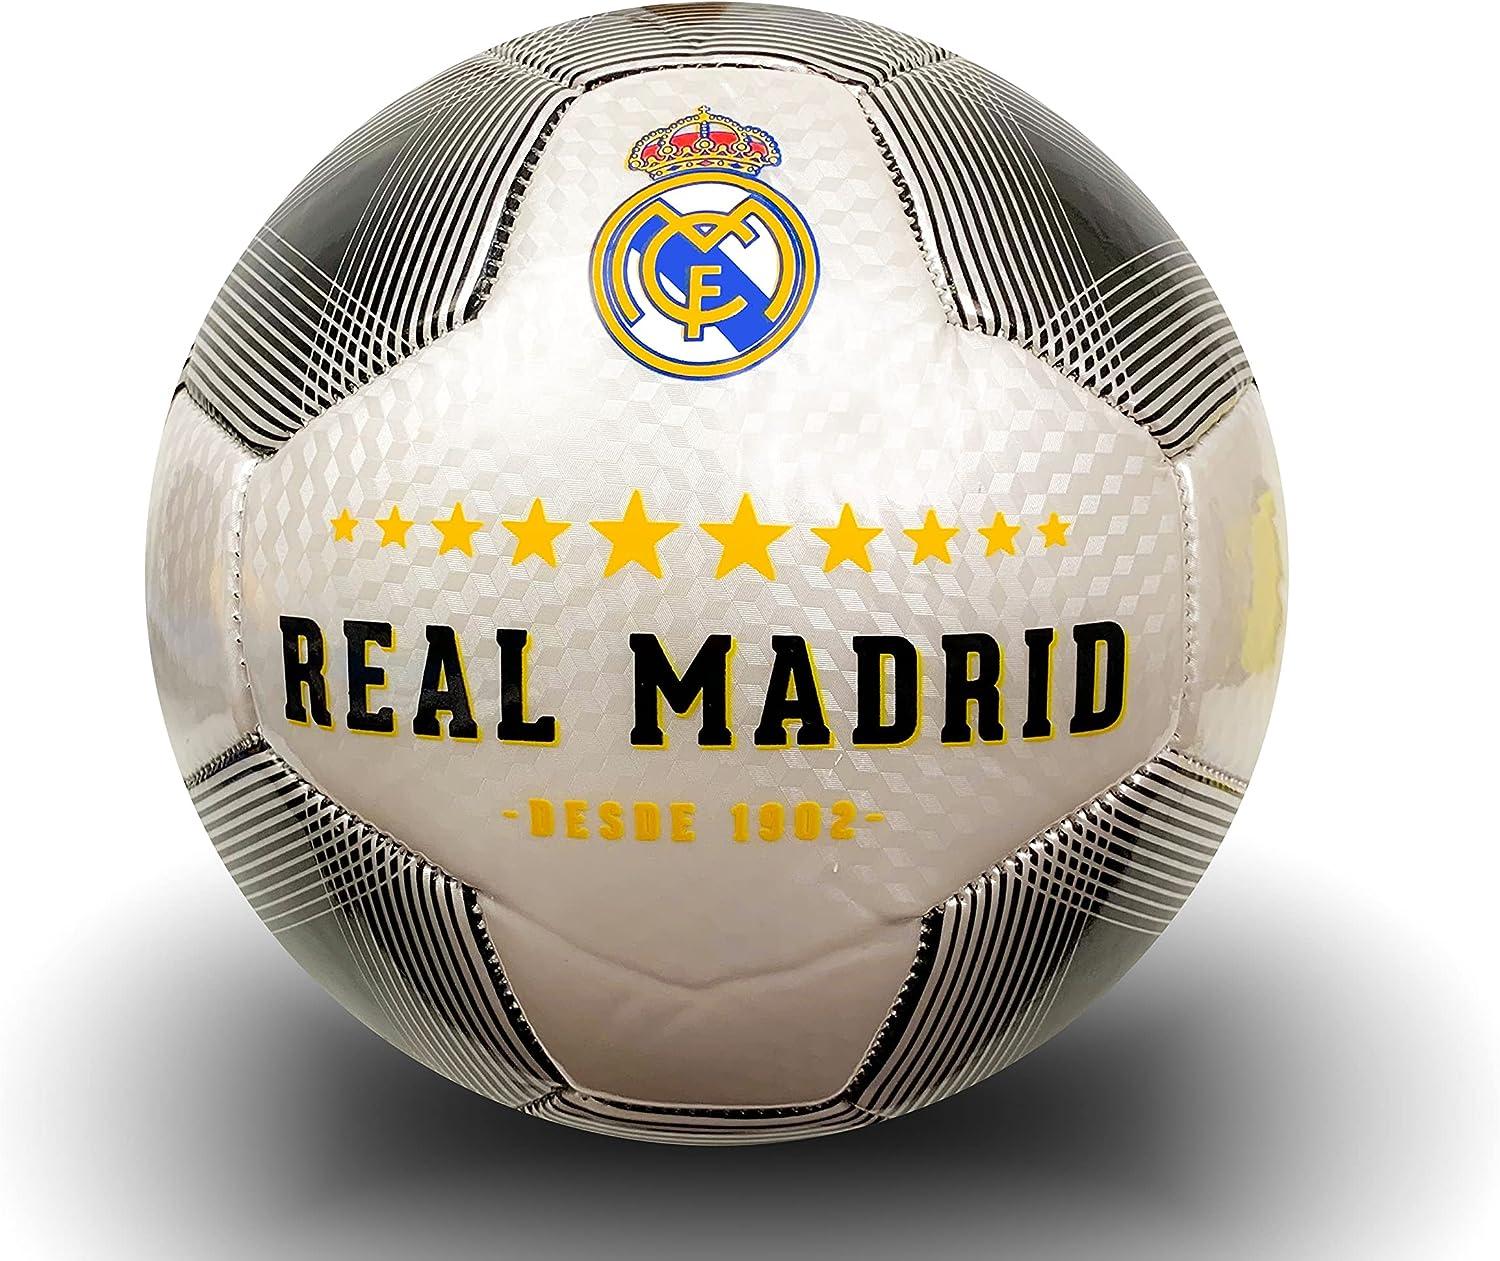 Real Madrid Since 1902 Soccer ball -Yellow/Fluo